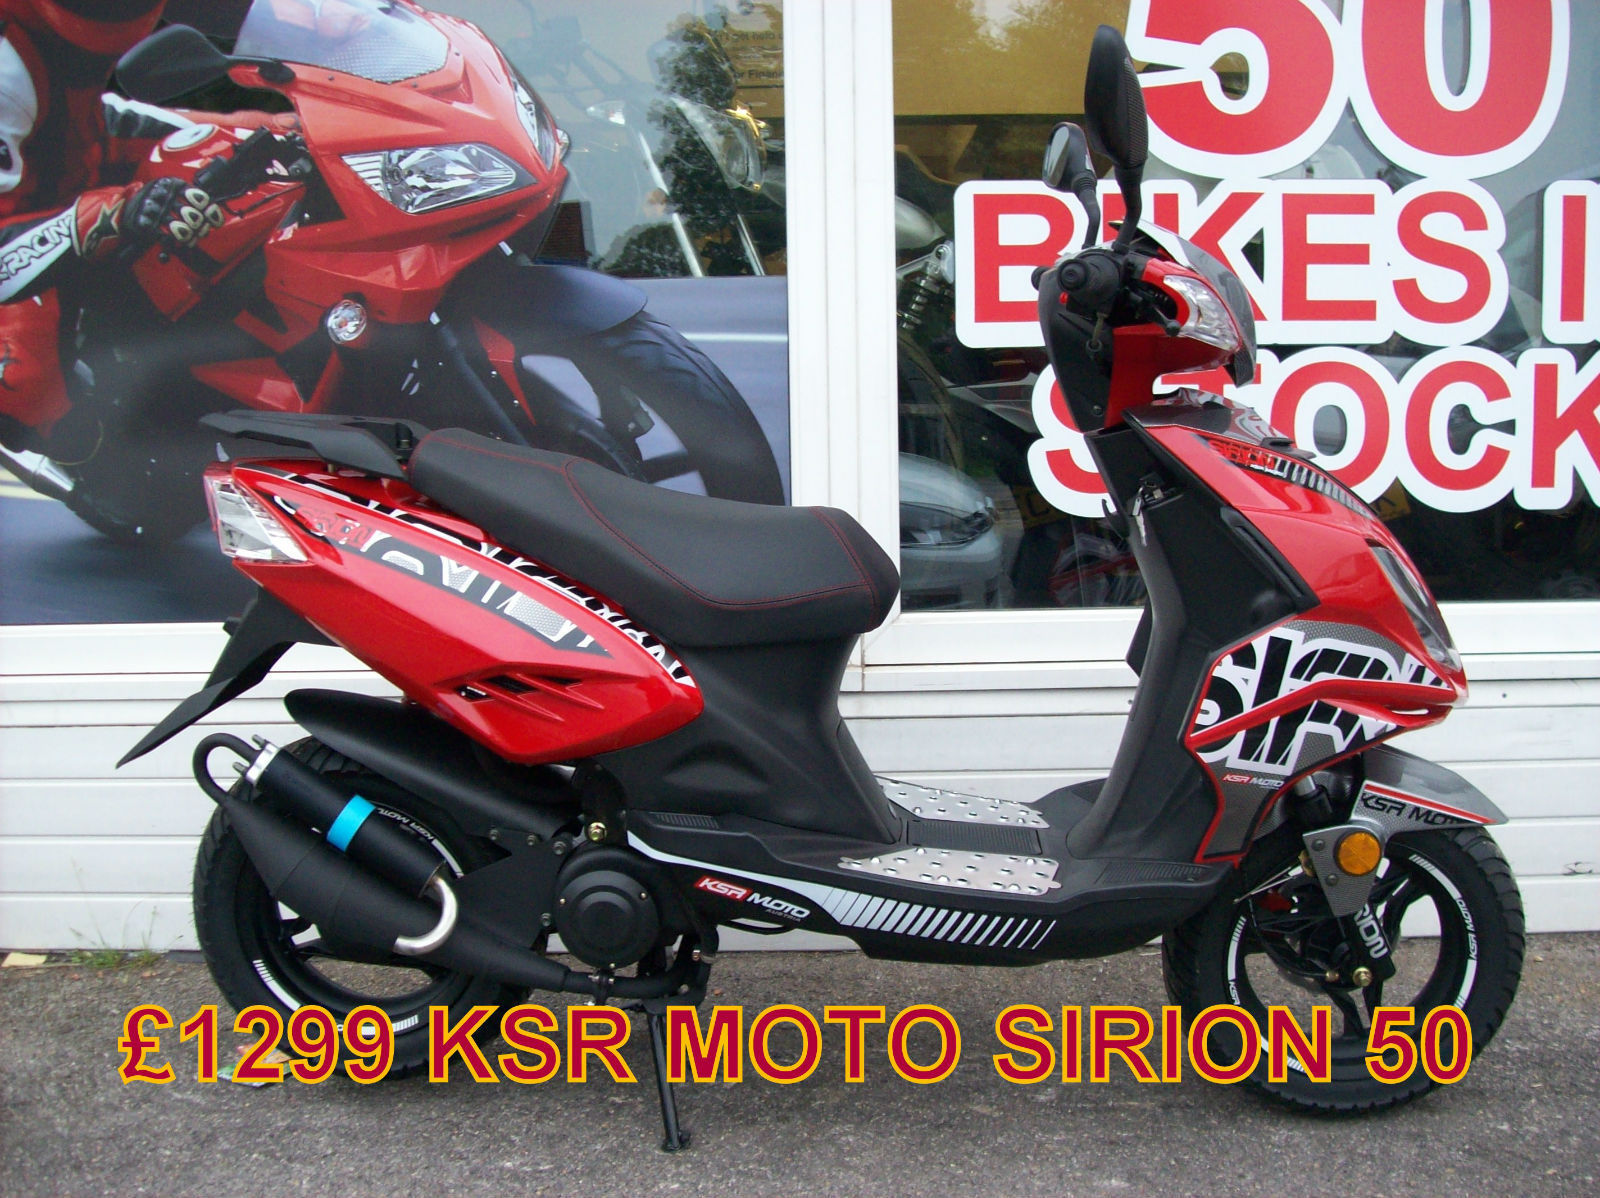 Generic Ksr Moto Sirion 50cc Excellent Sports 50cc Moped 12 Months Warranty 